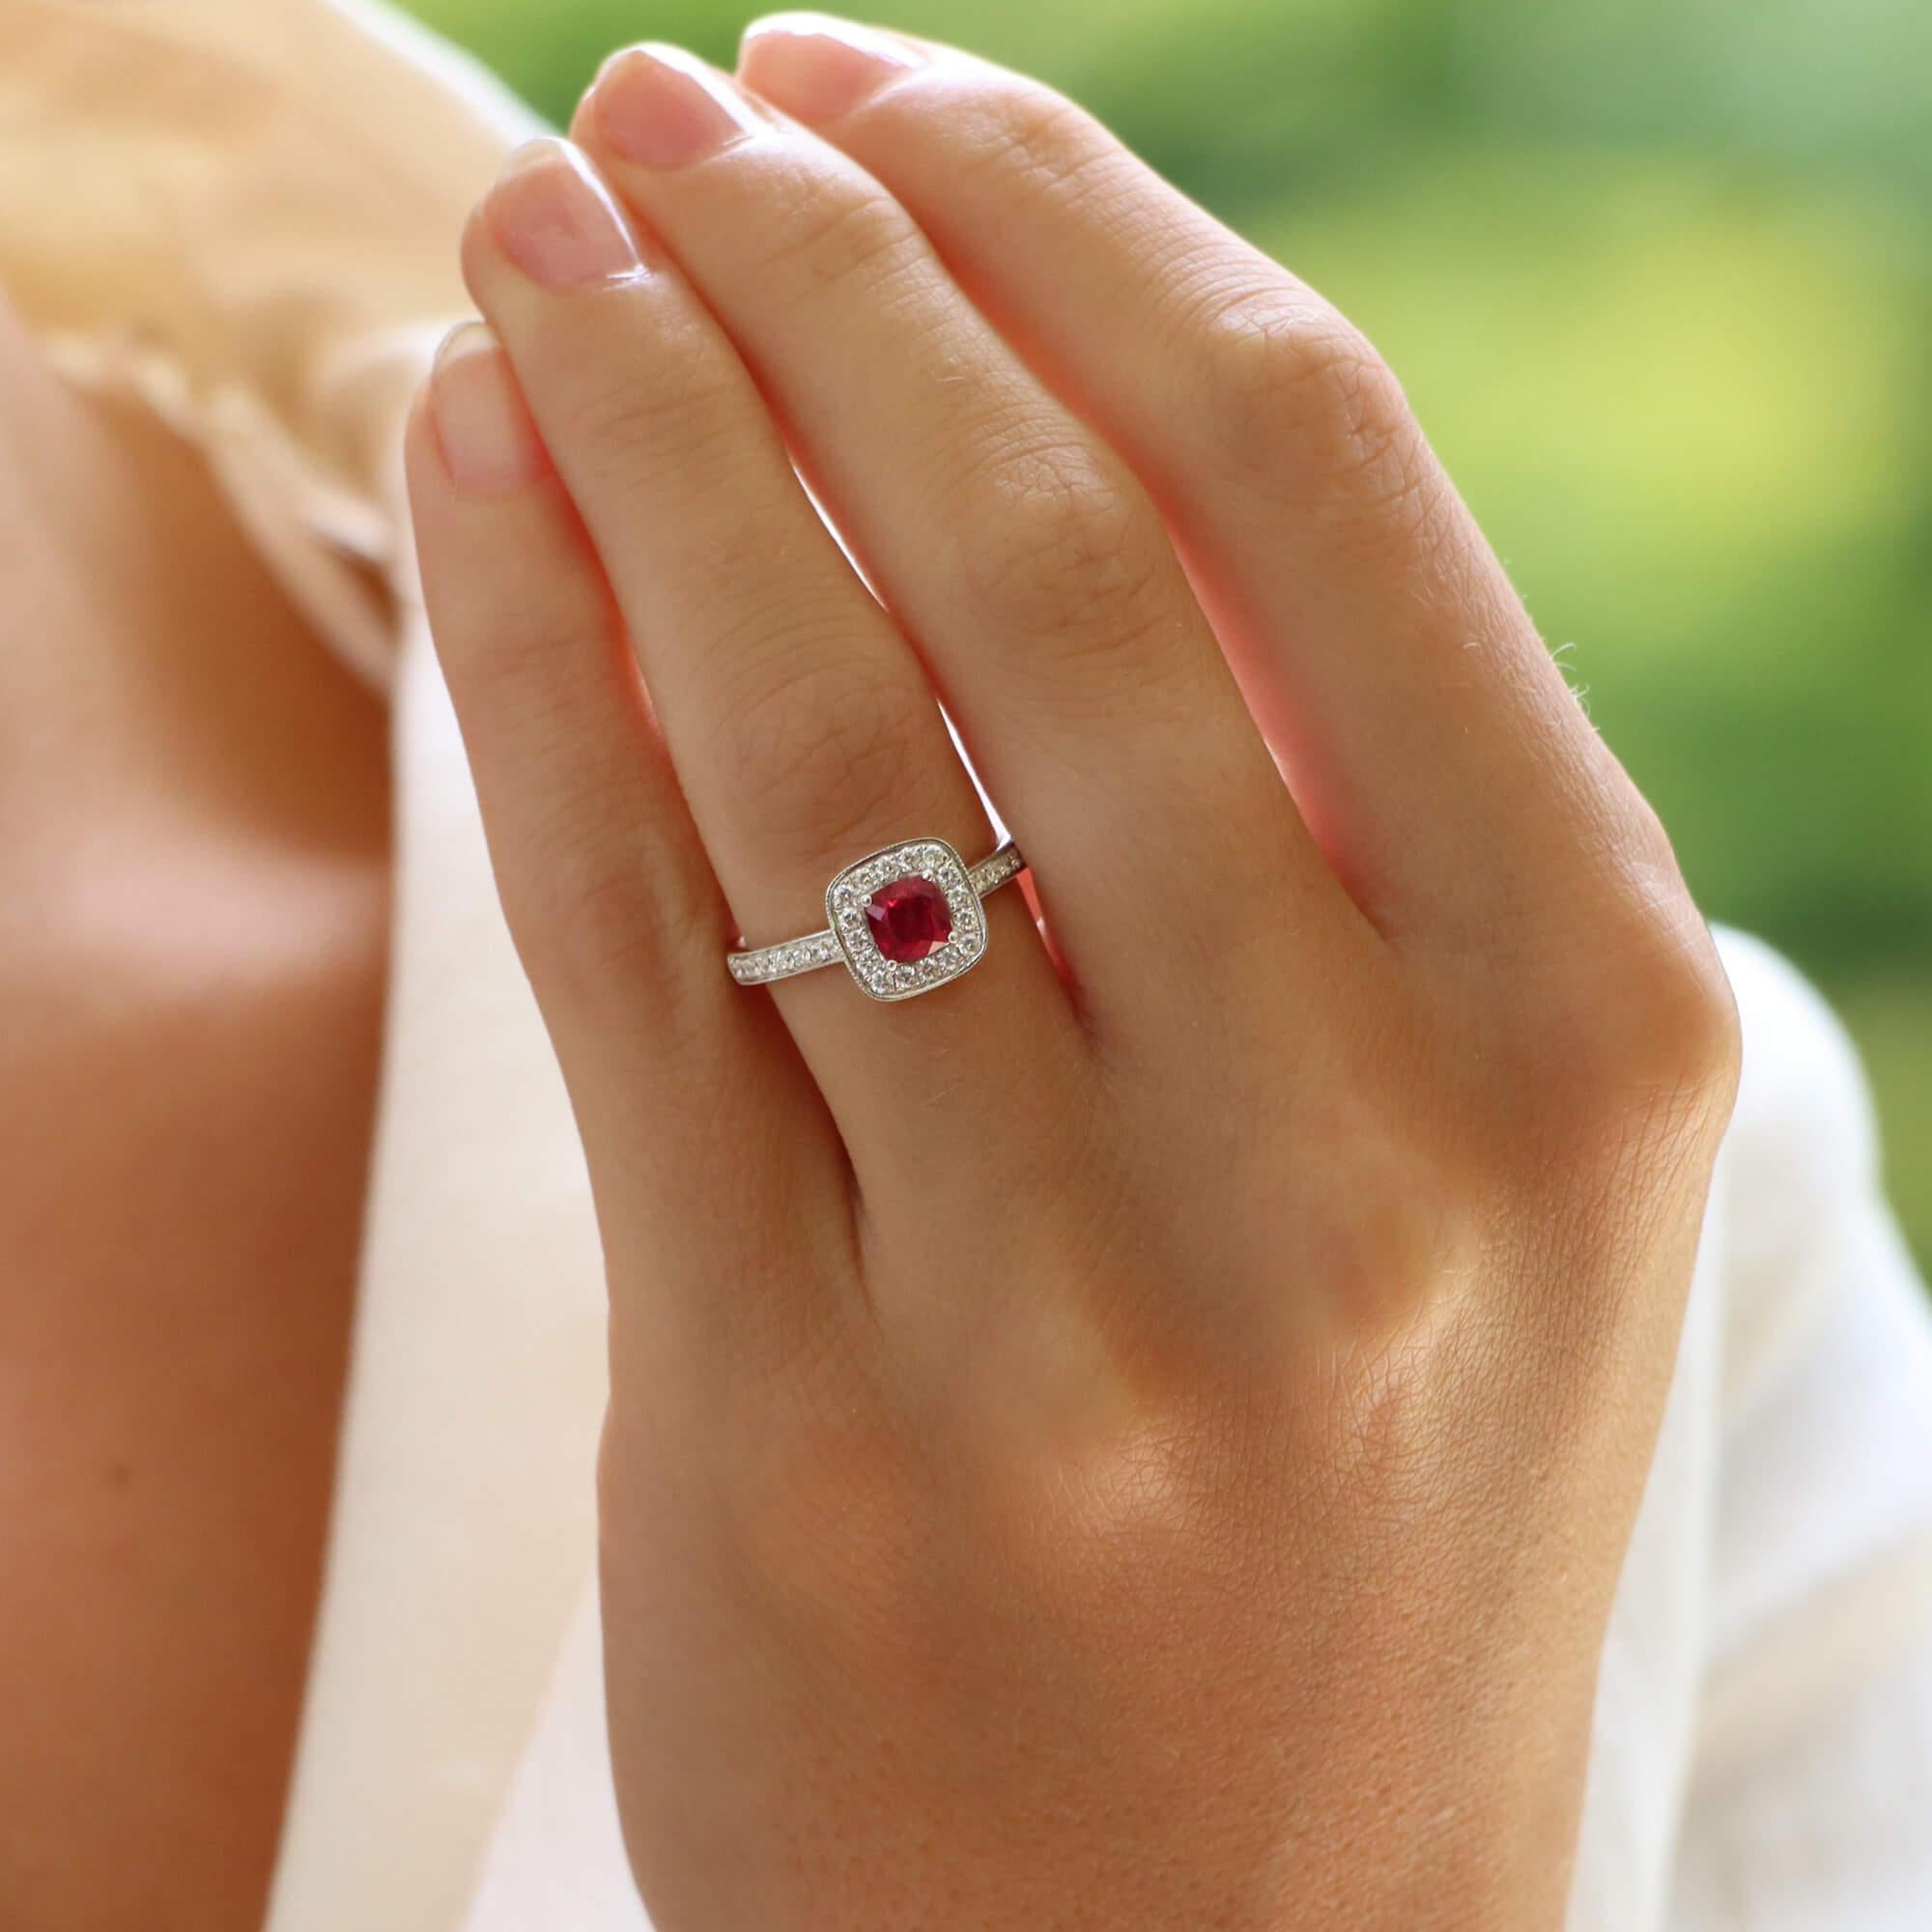 A beautiful ruby and diamond cluster ring set in 18k white gold.

The ring is predominantly set with a vibrant cushion cut red ruby which is four claw set to centre. Surrounding the ruby is then a cluster of 16 sparkly round brilliant cut diamonds,